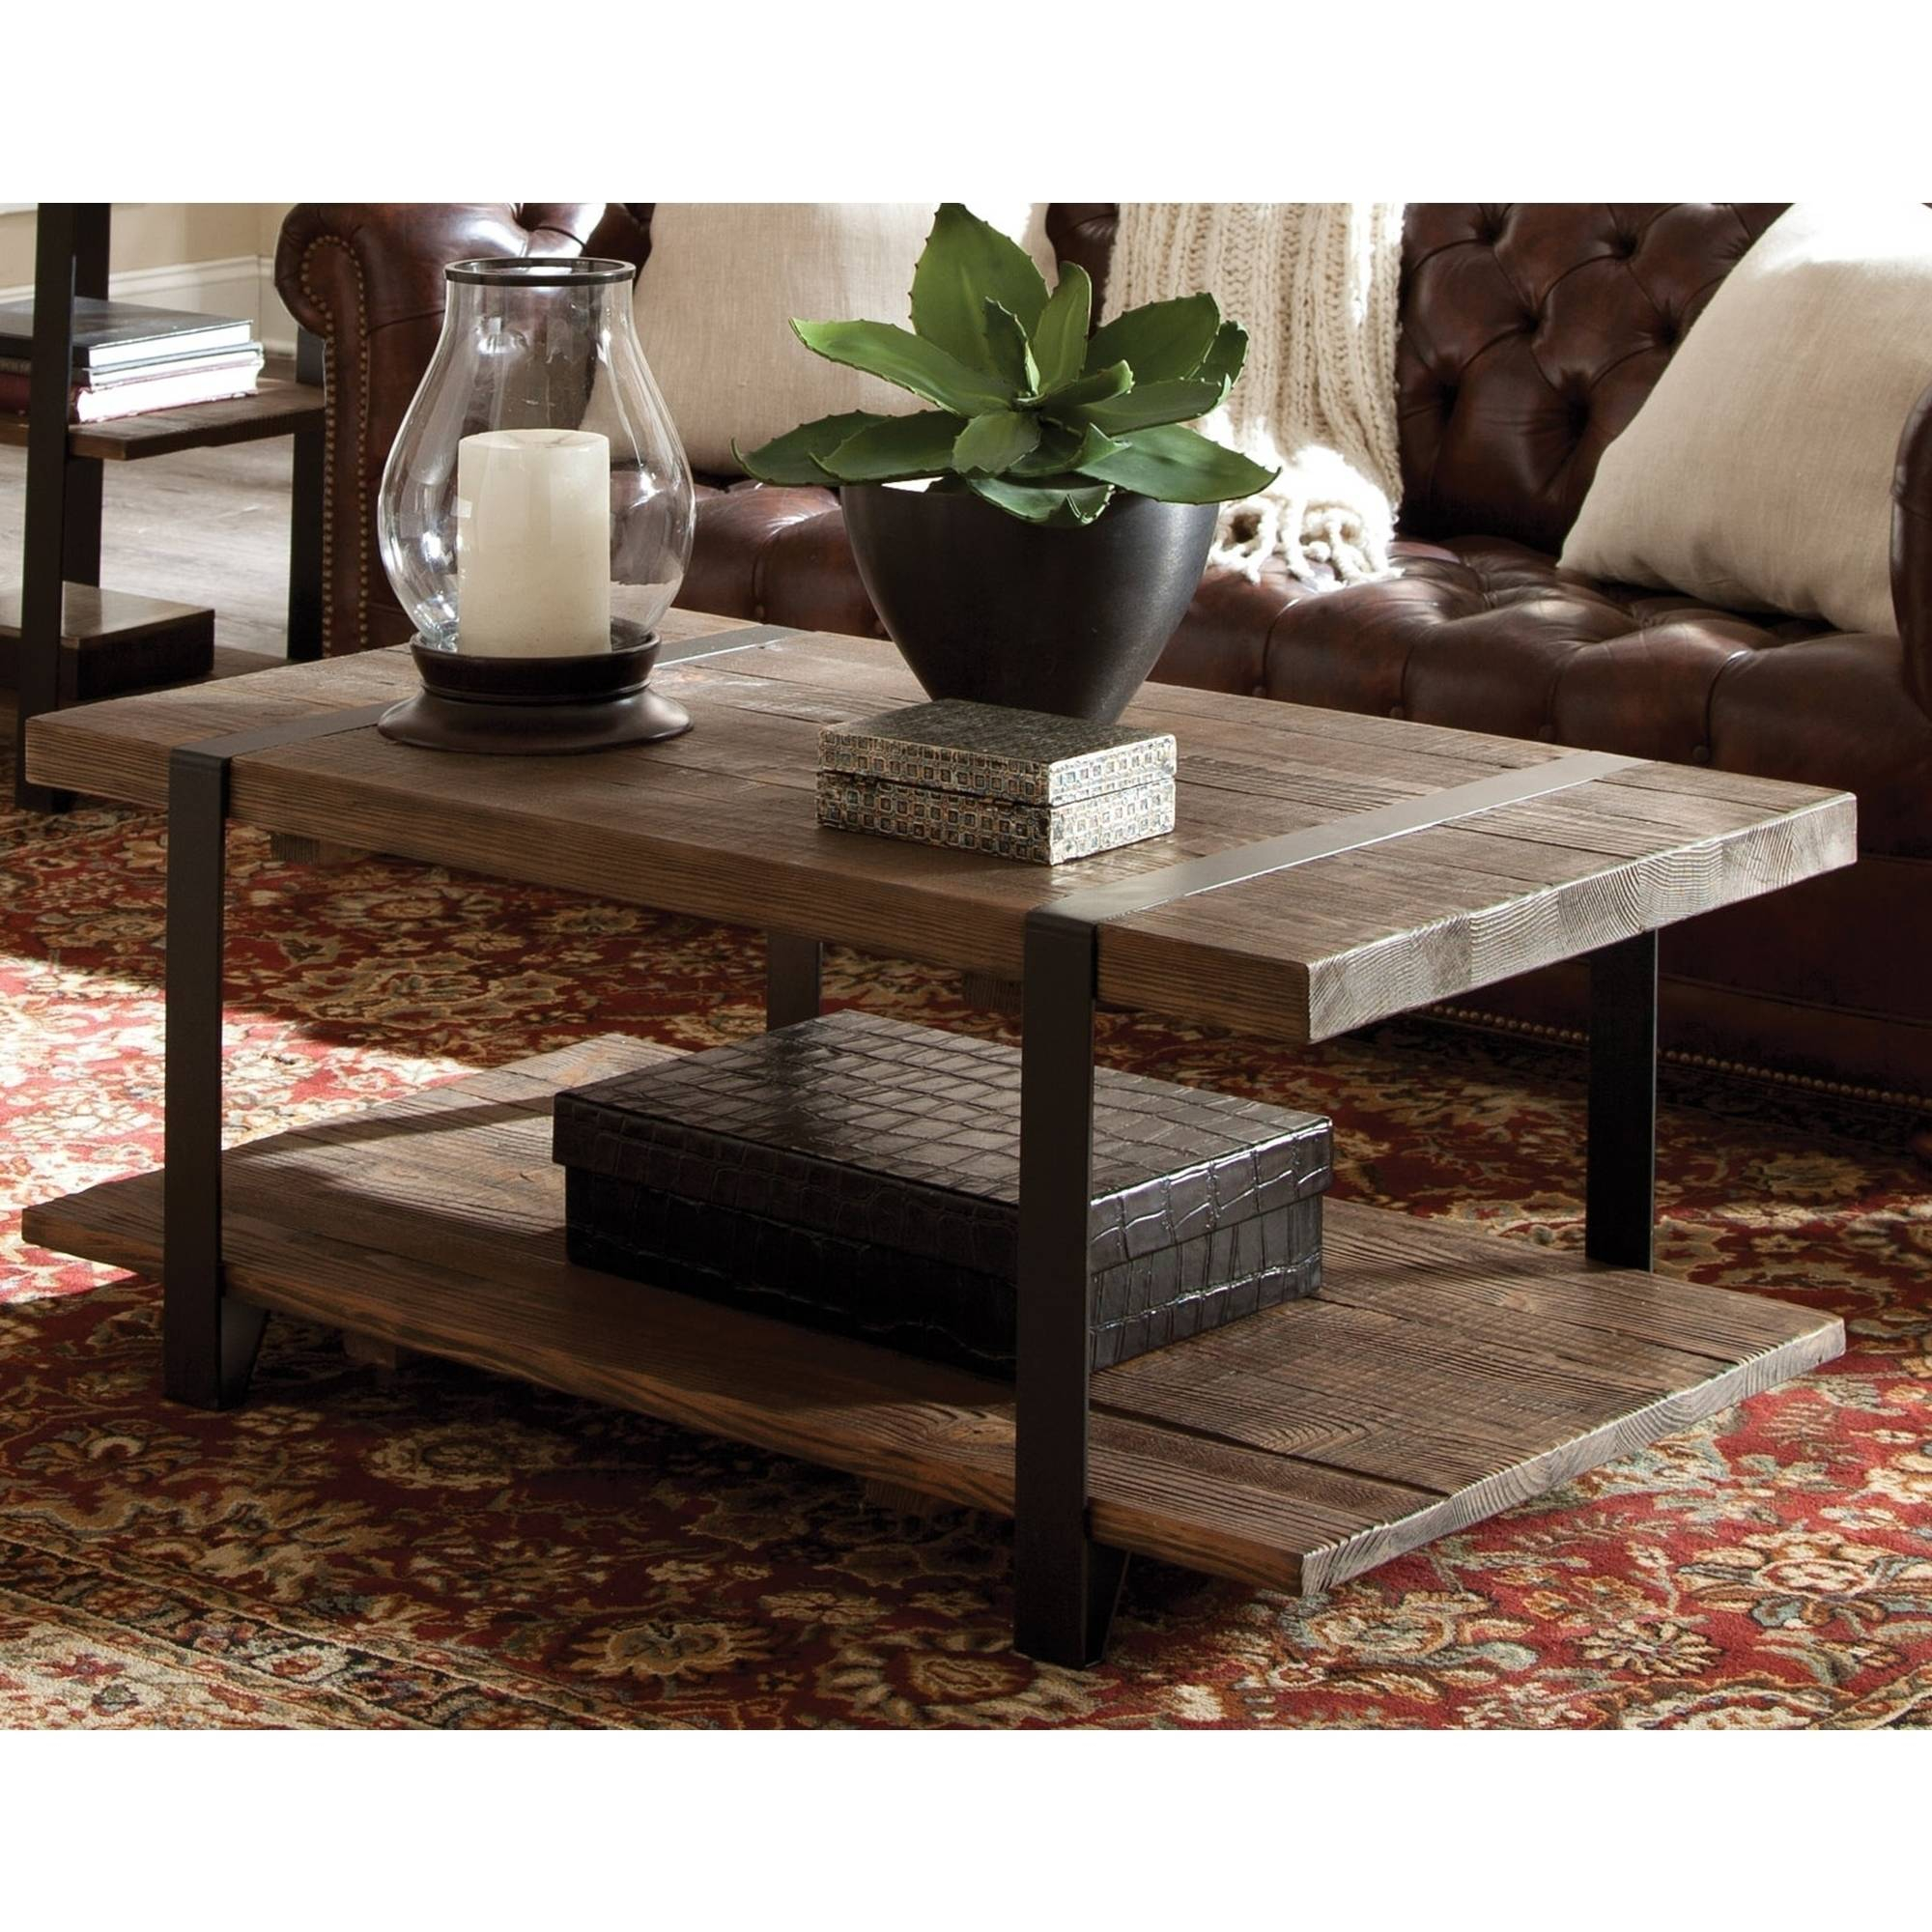 Modesto Coffee Table Rustic Natural Walmart within size 2000 X 2000